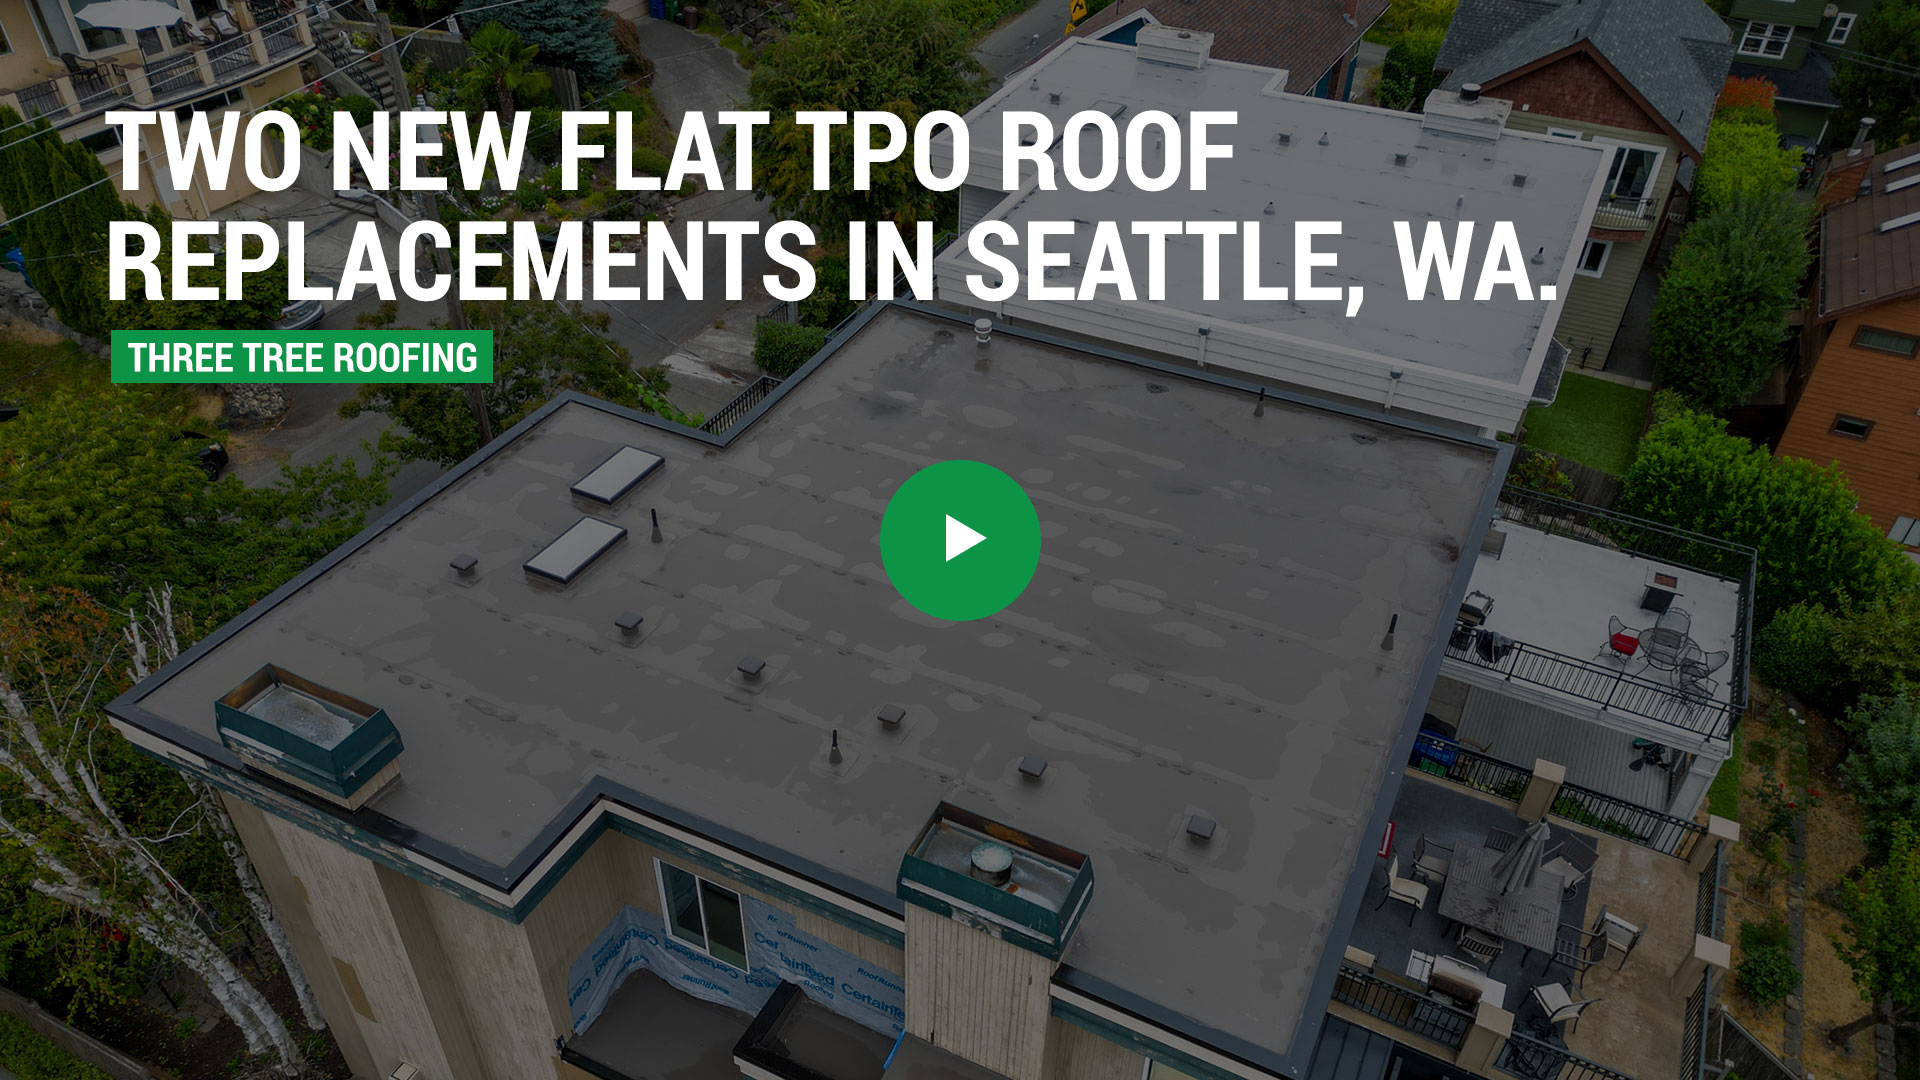 Roofing Project: Flat TPO Roof Replacements in Seattle, Washington - Roofing Video